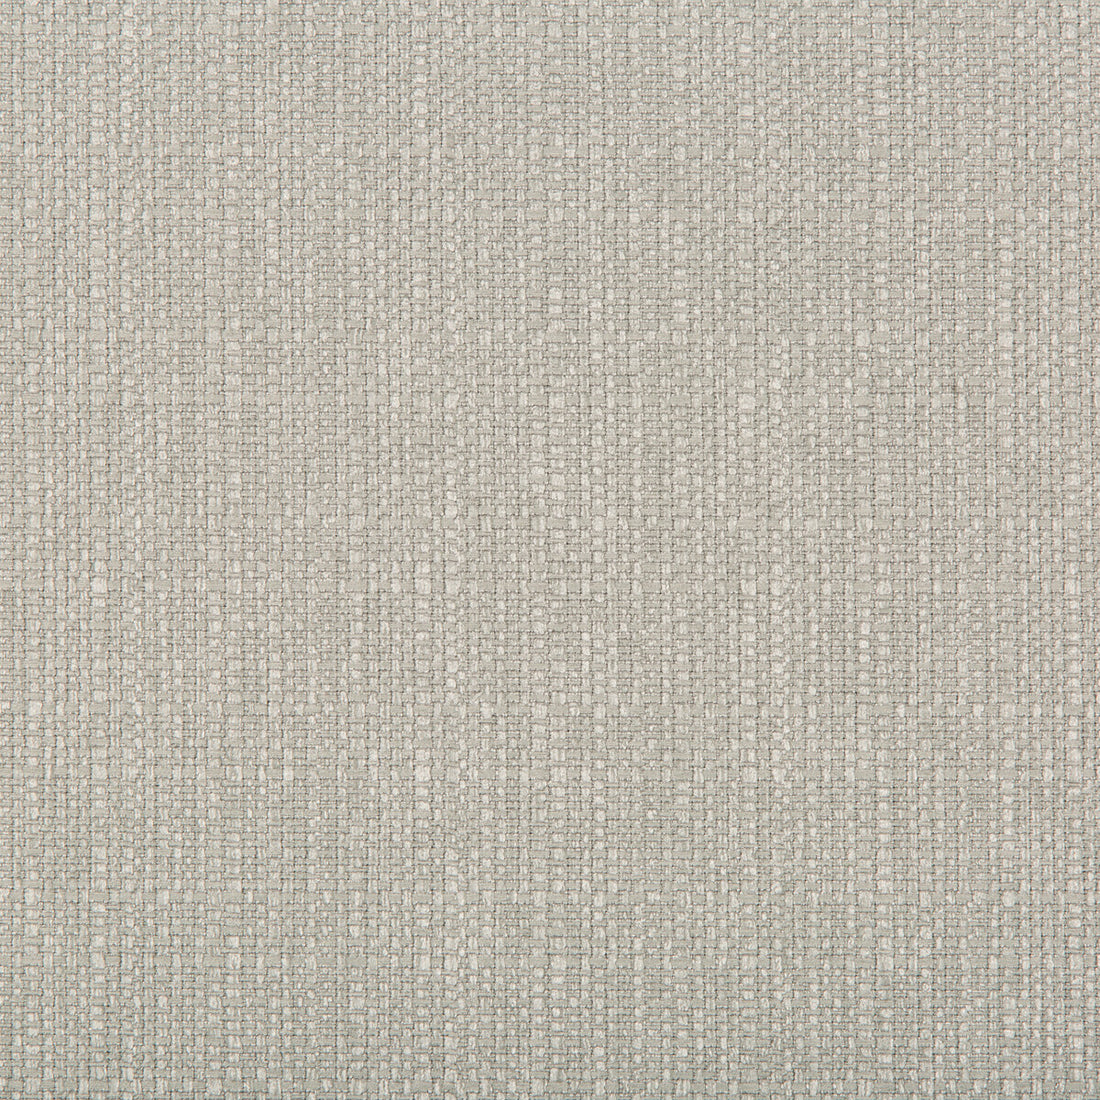 Kravet Contract fabric in 35472-11 color - pattern 35472.11.0 - by Kravet Contract